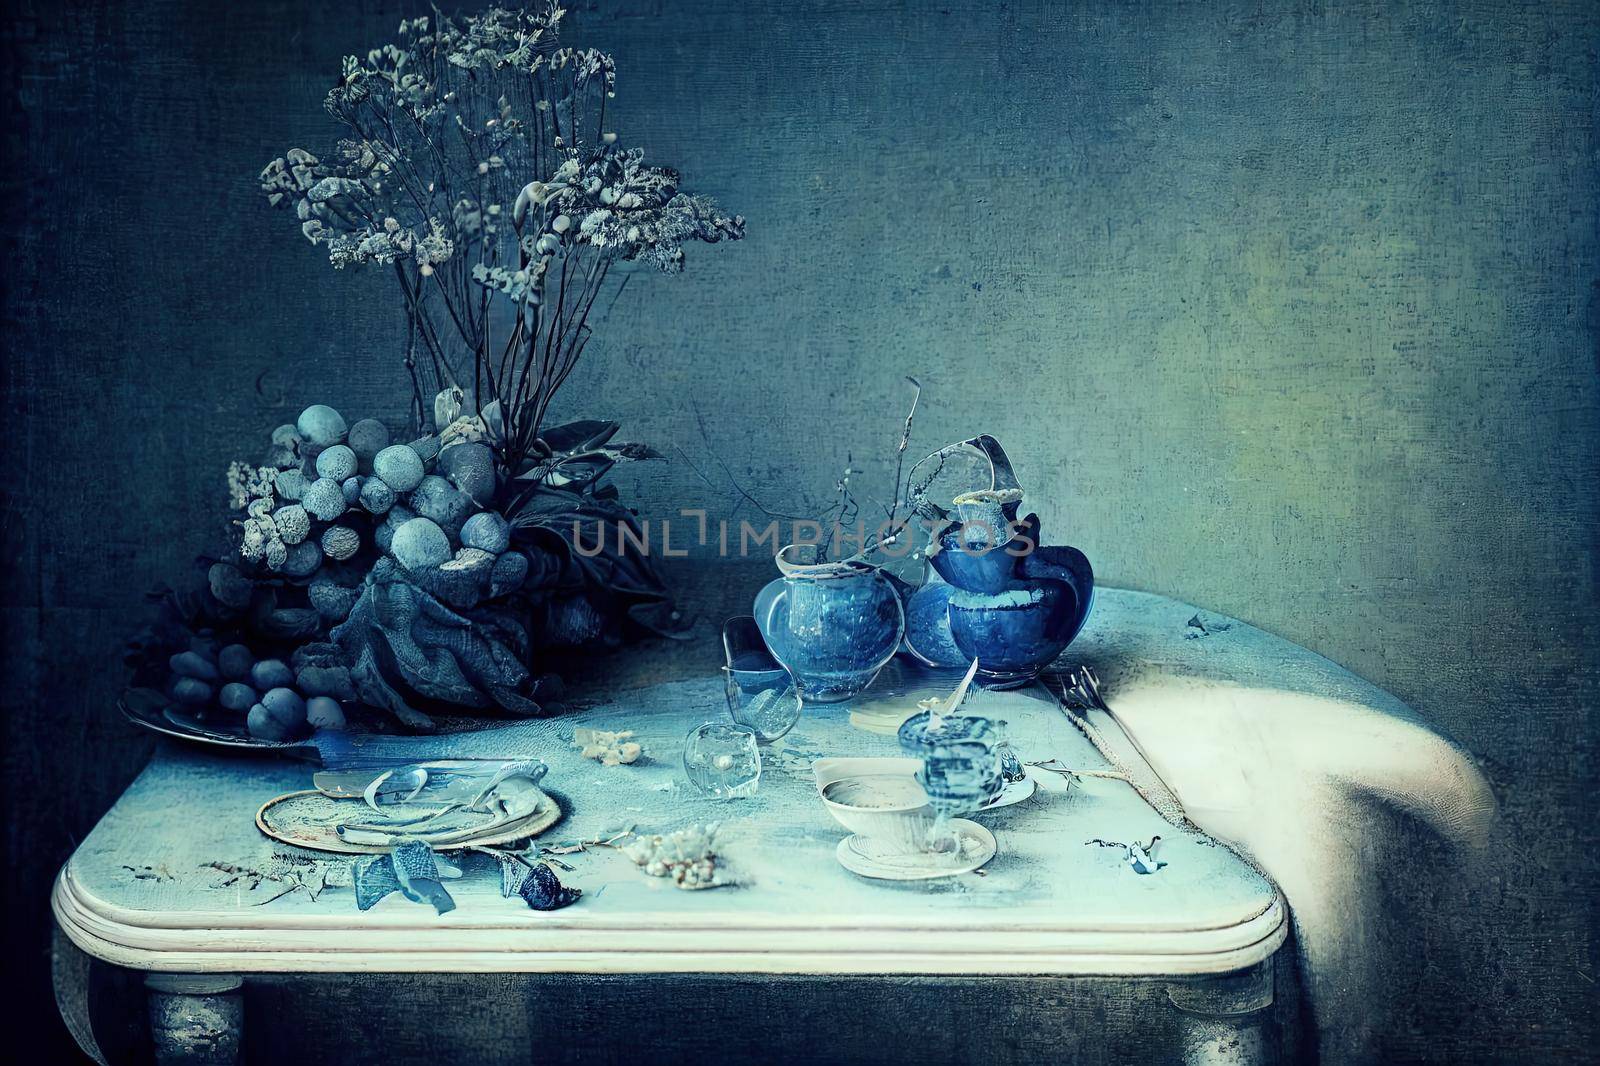 beautiful blue blurred background of winter and shabby table. High quality illustration